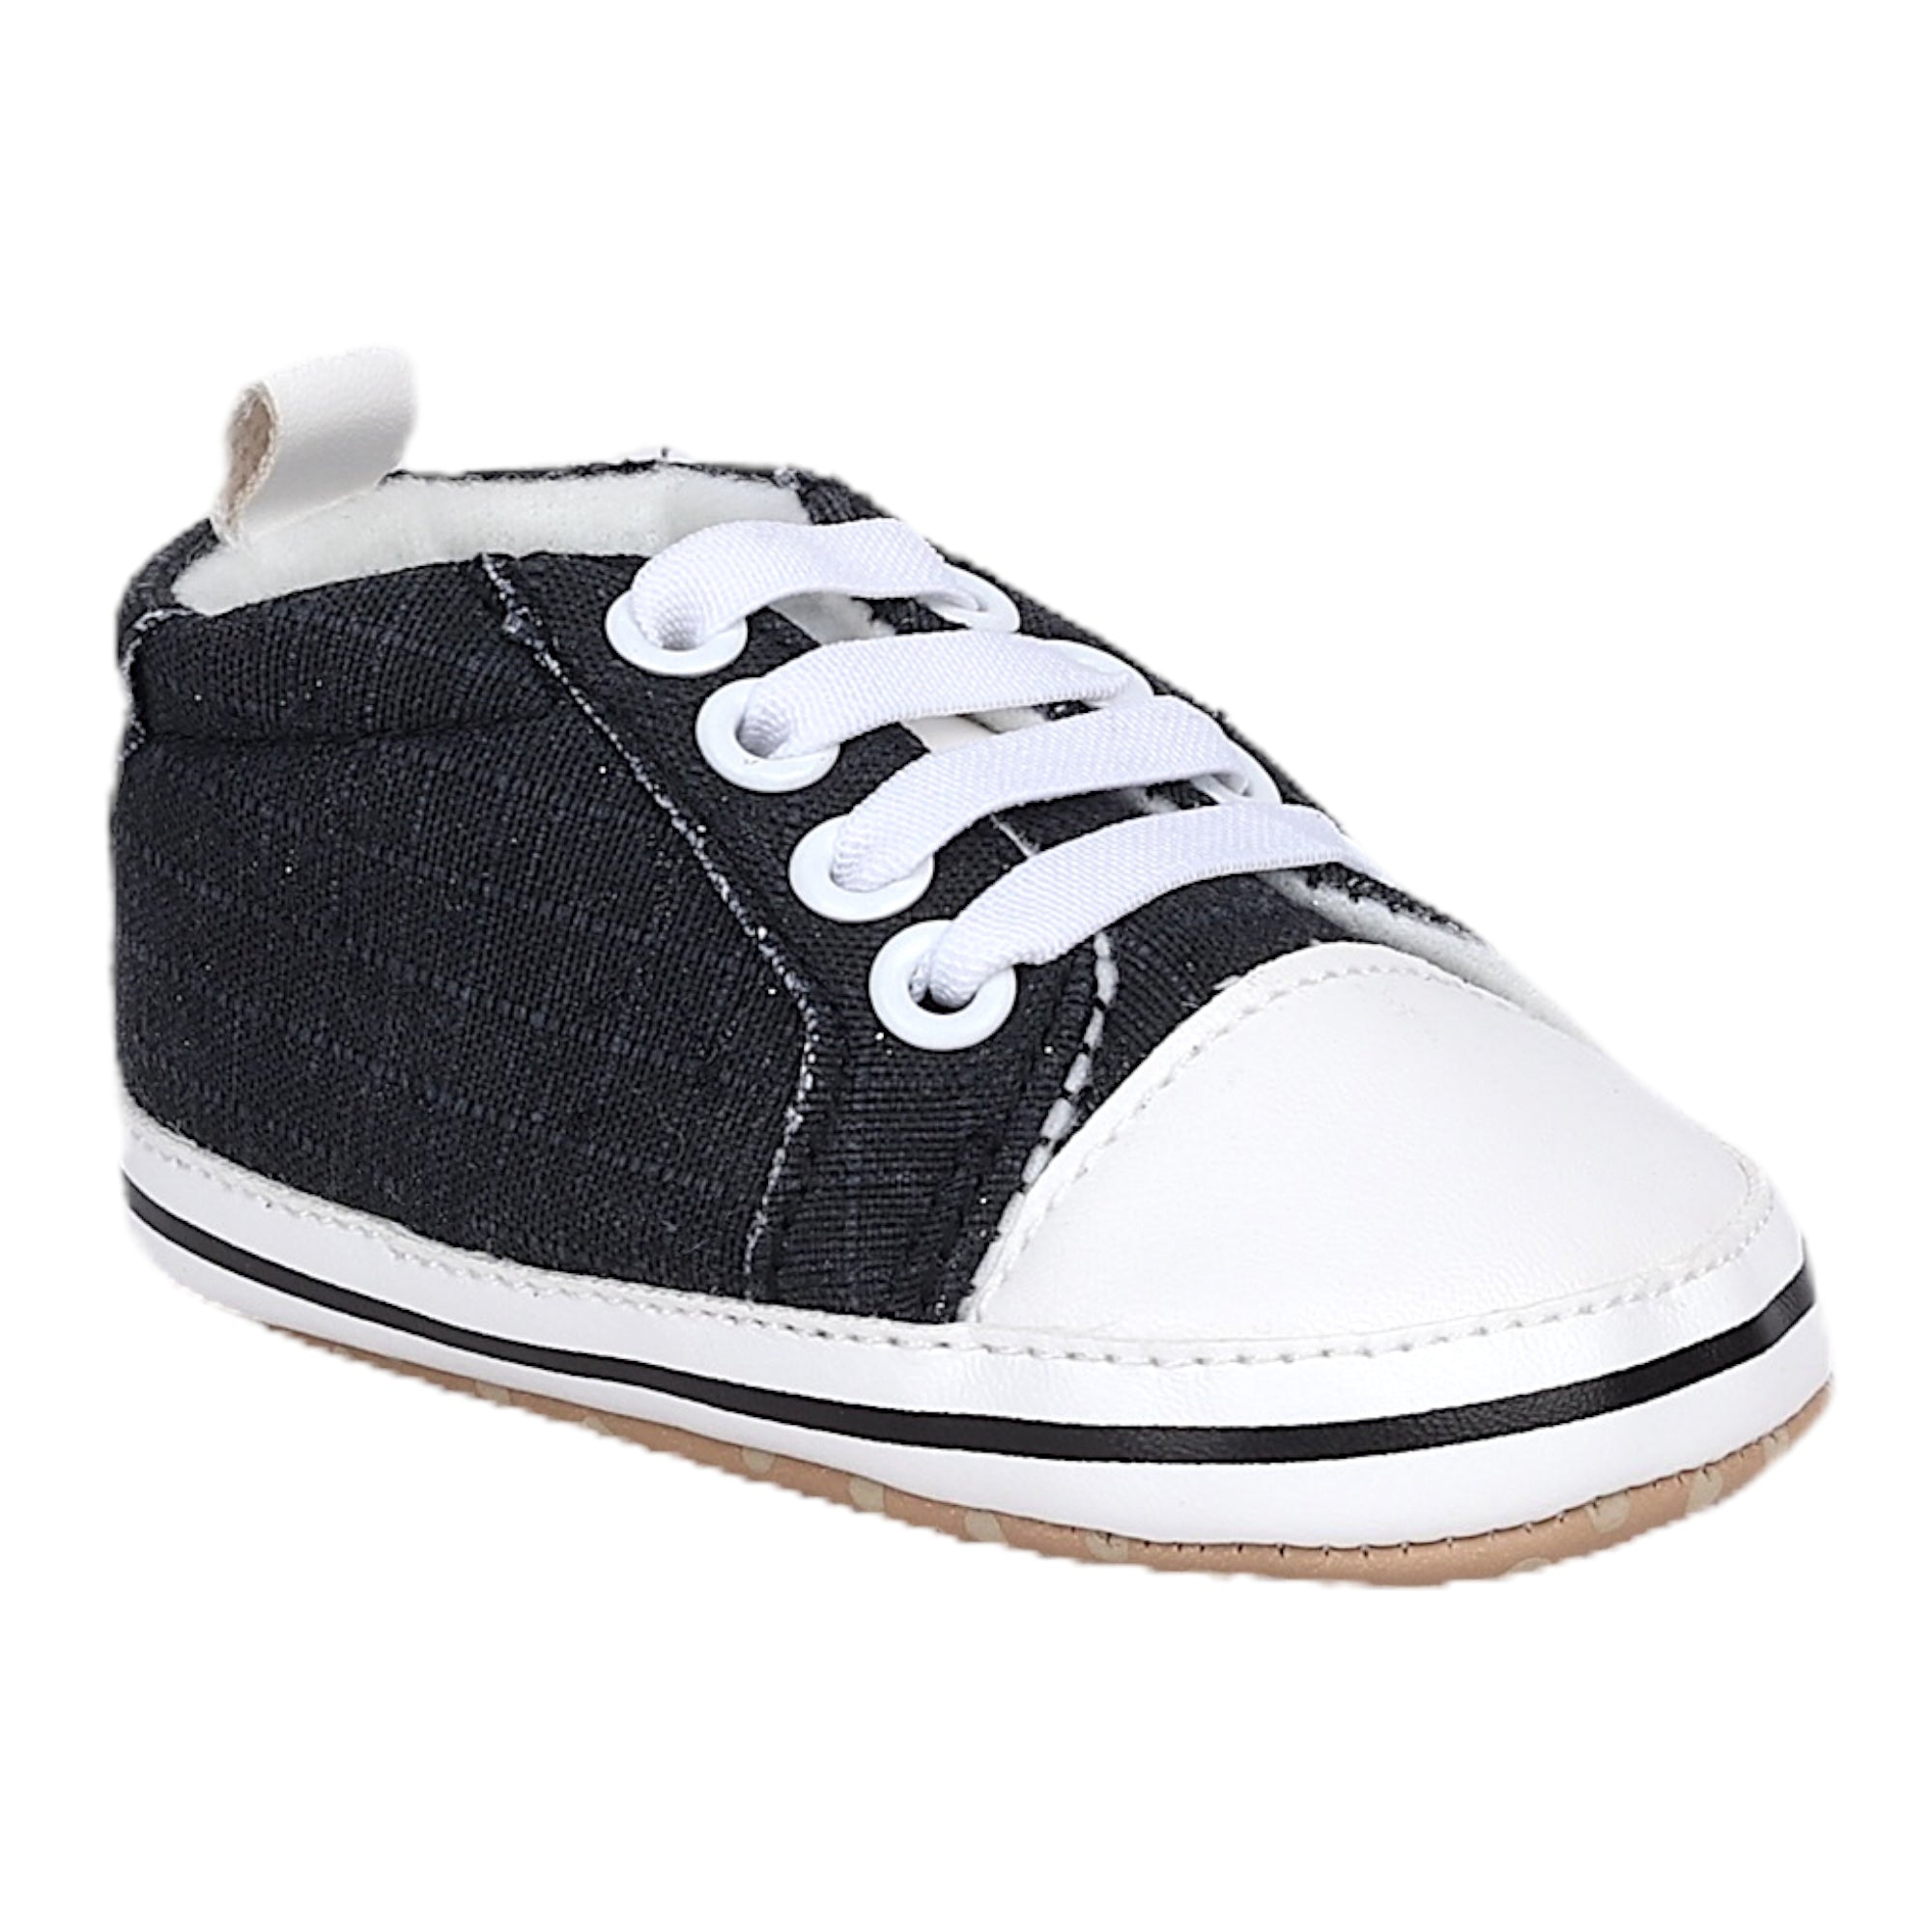 Baby Moo Canvas All Stars Anti-Skid Classic Sneakers - Black, White